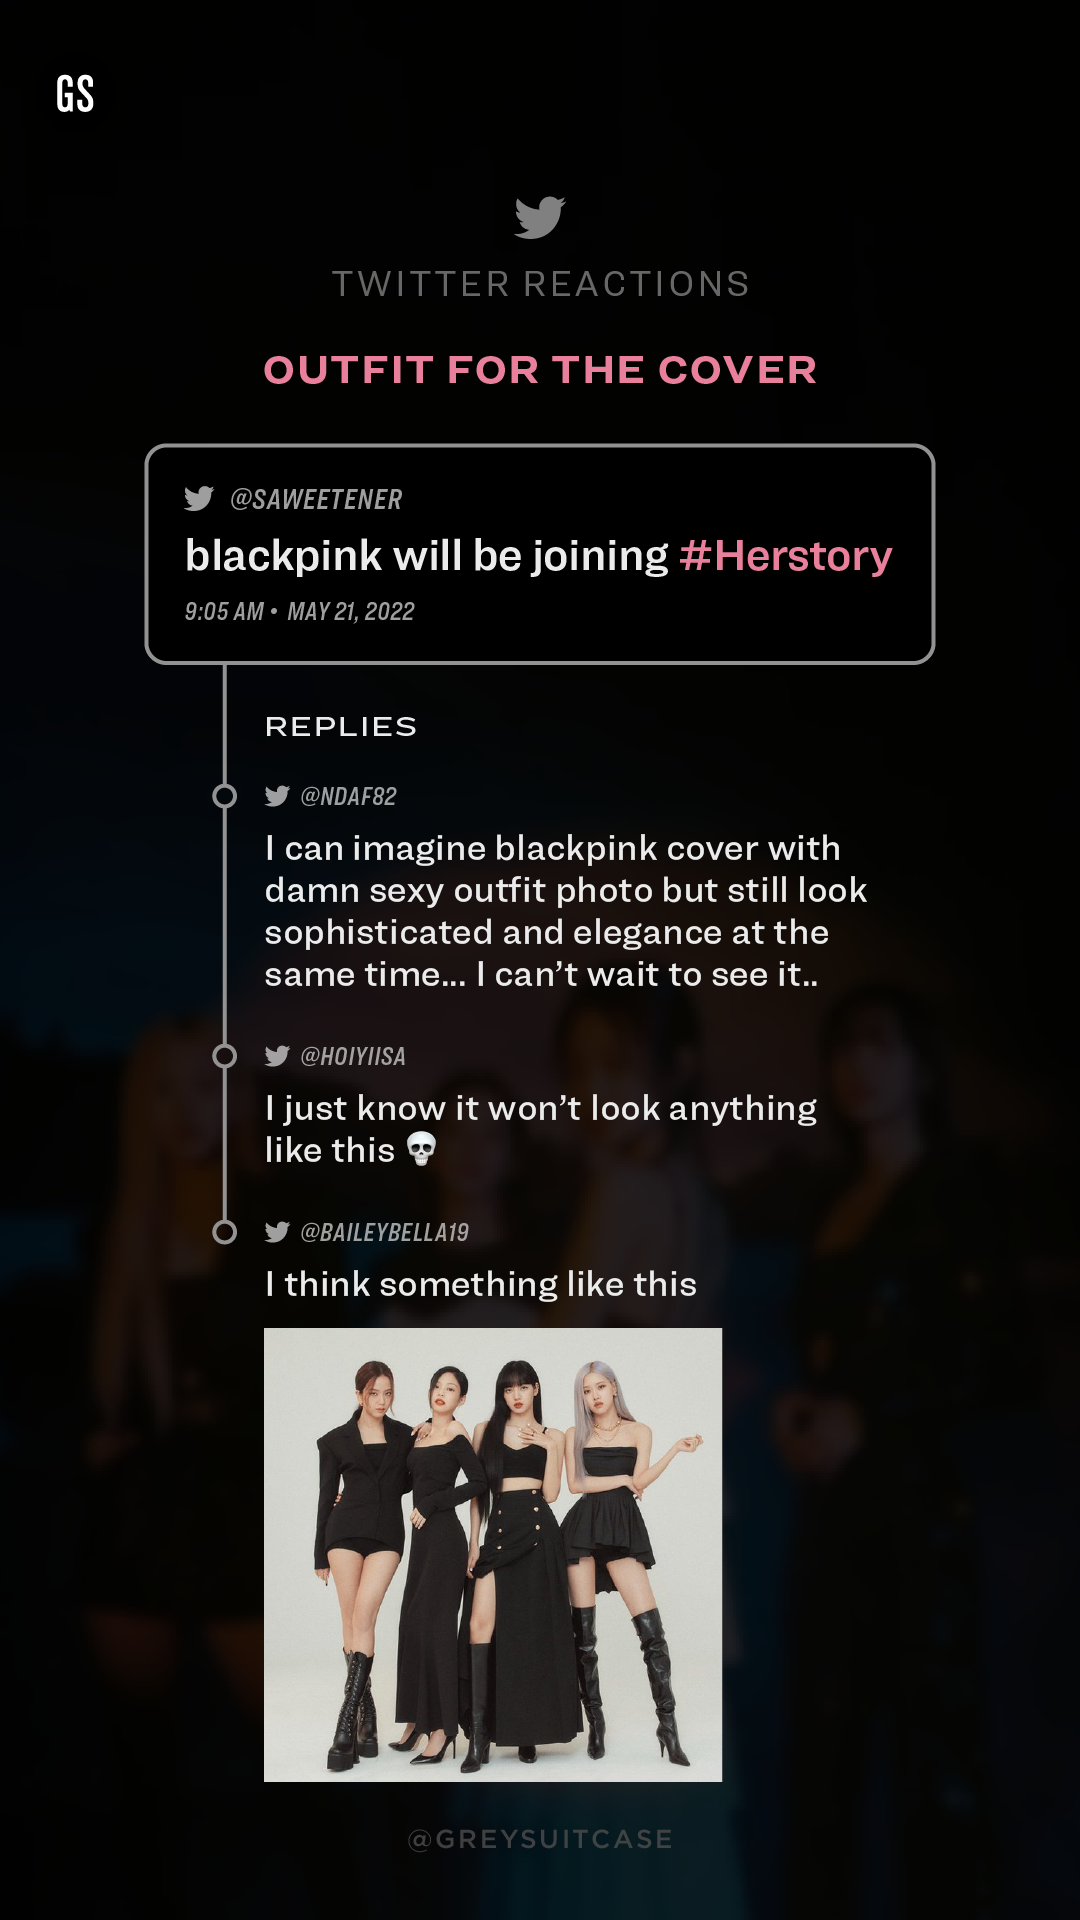  Blackpink x Rolling Stone Announcement Twitter Reactions 